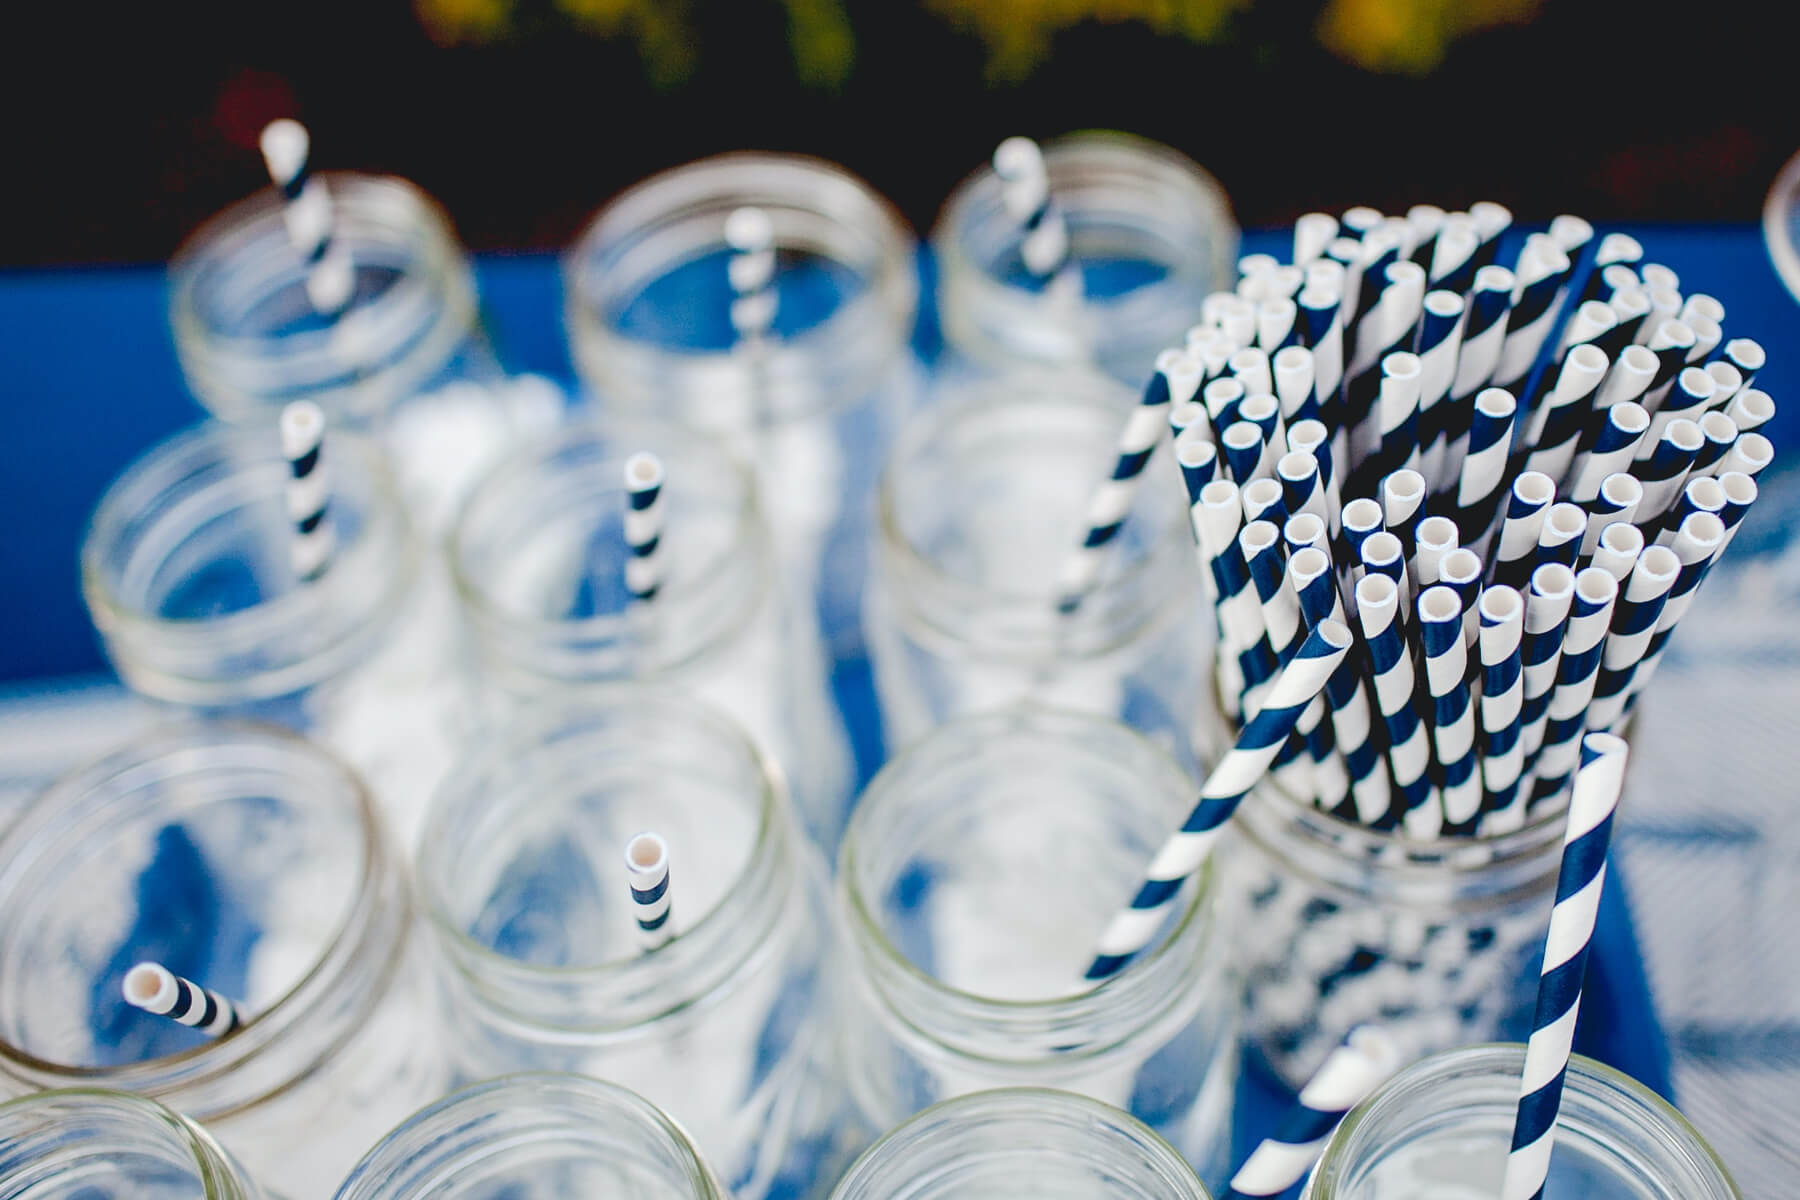 Mason jars on a table with blue and white striped straws